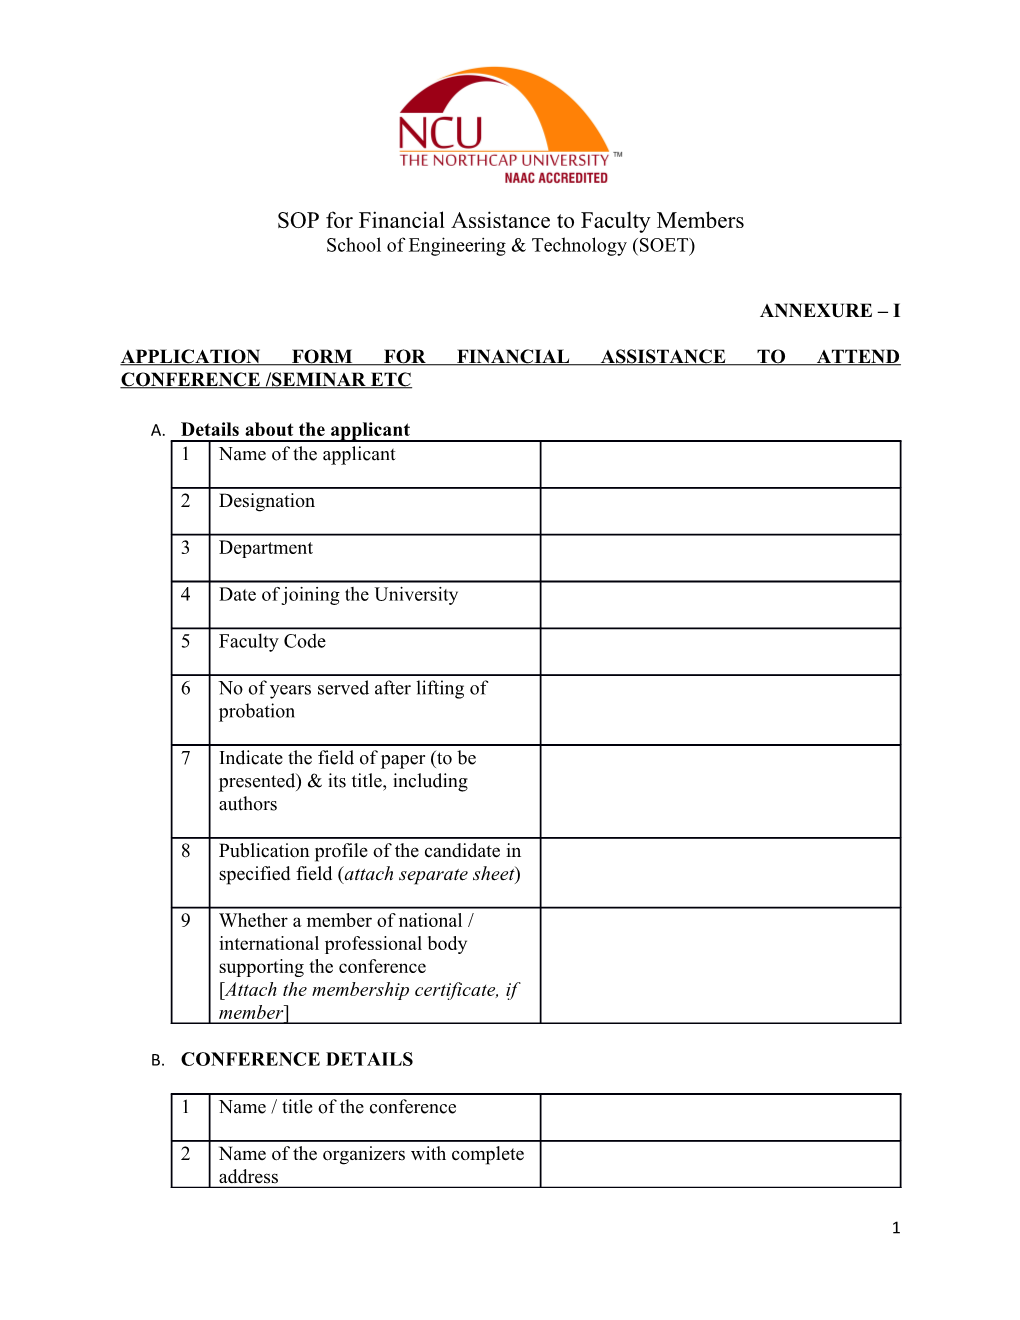 Application Form for Financial Assistance to Attend Conference /Seminar Etc